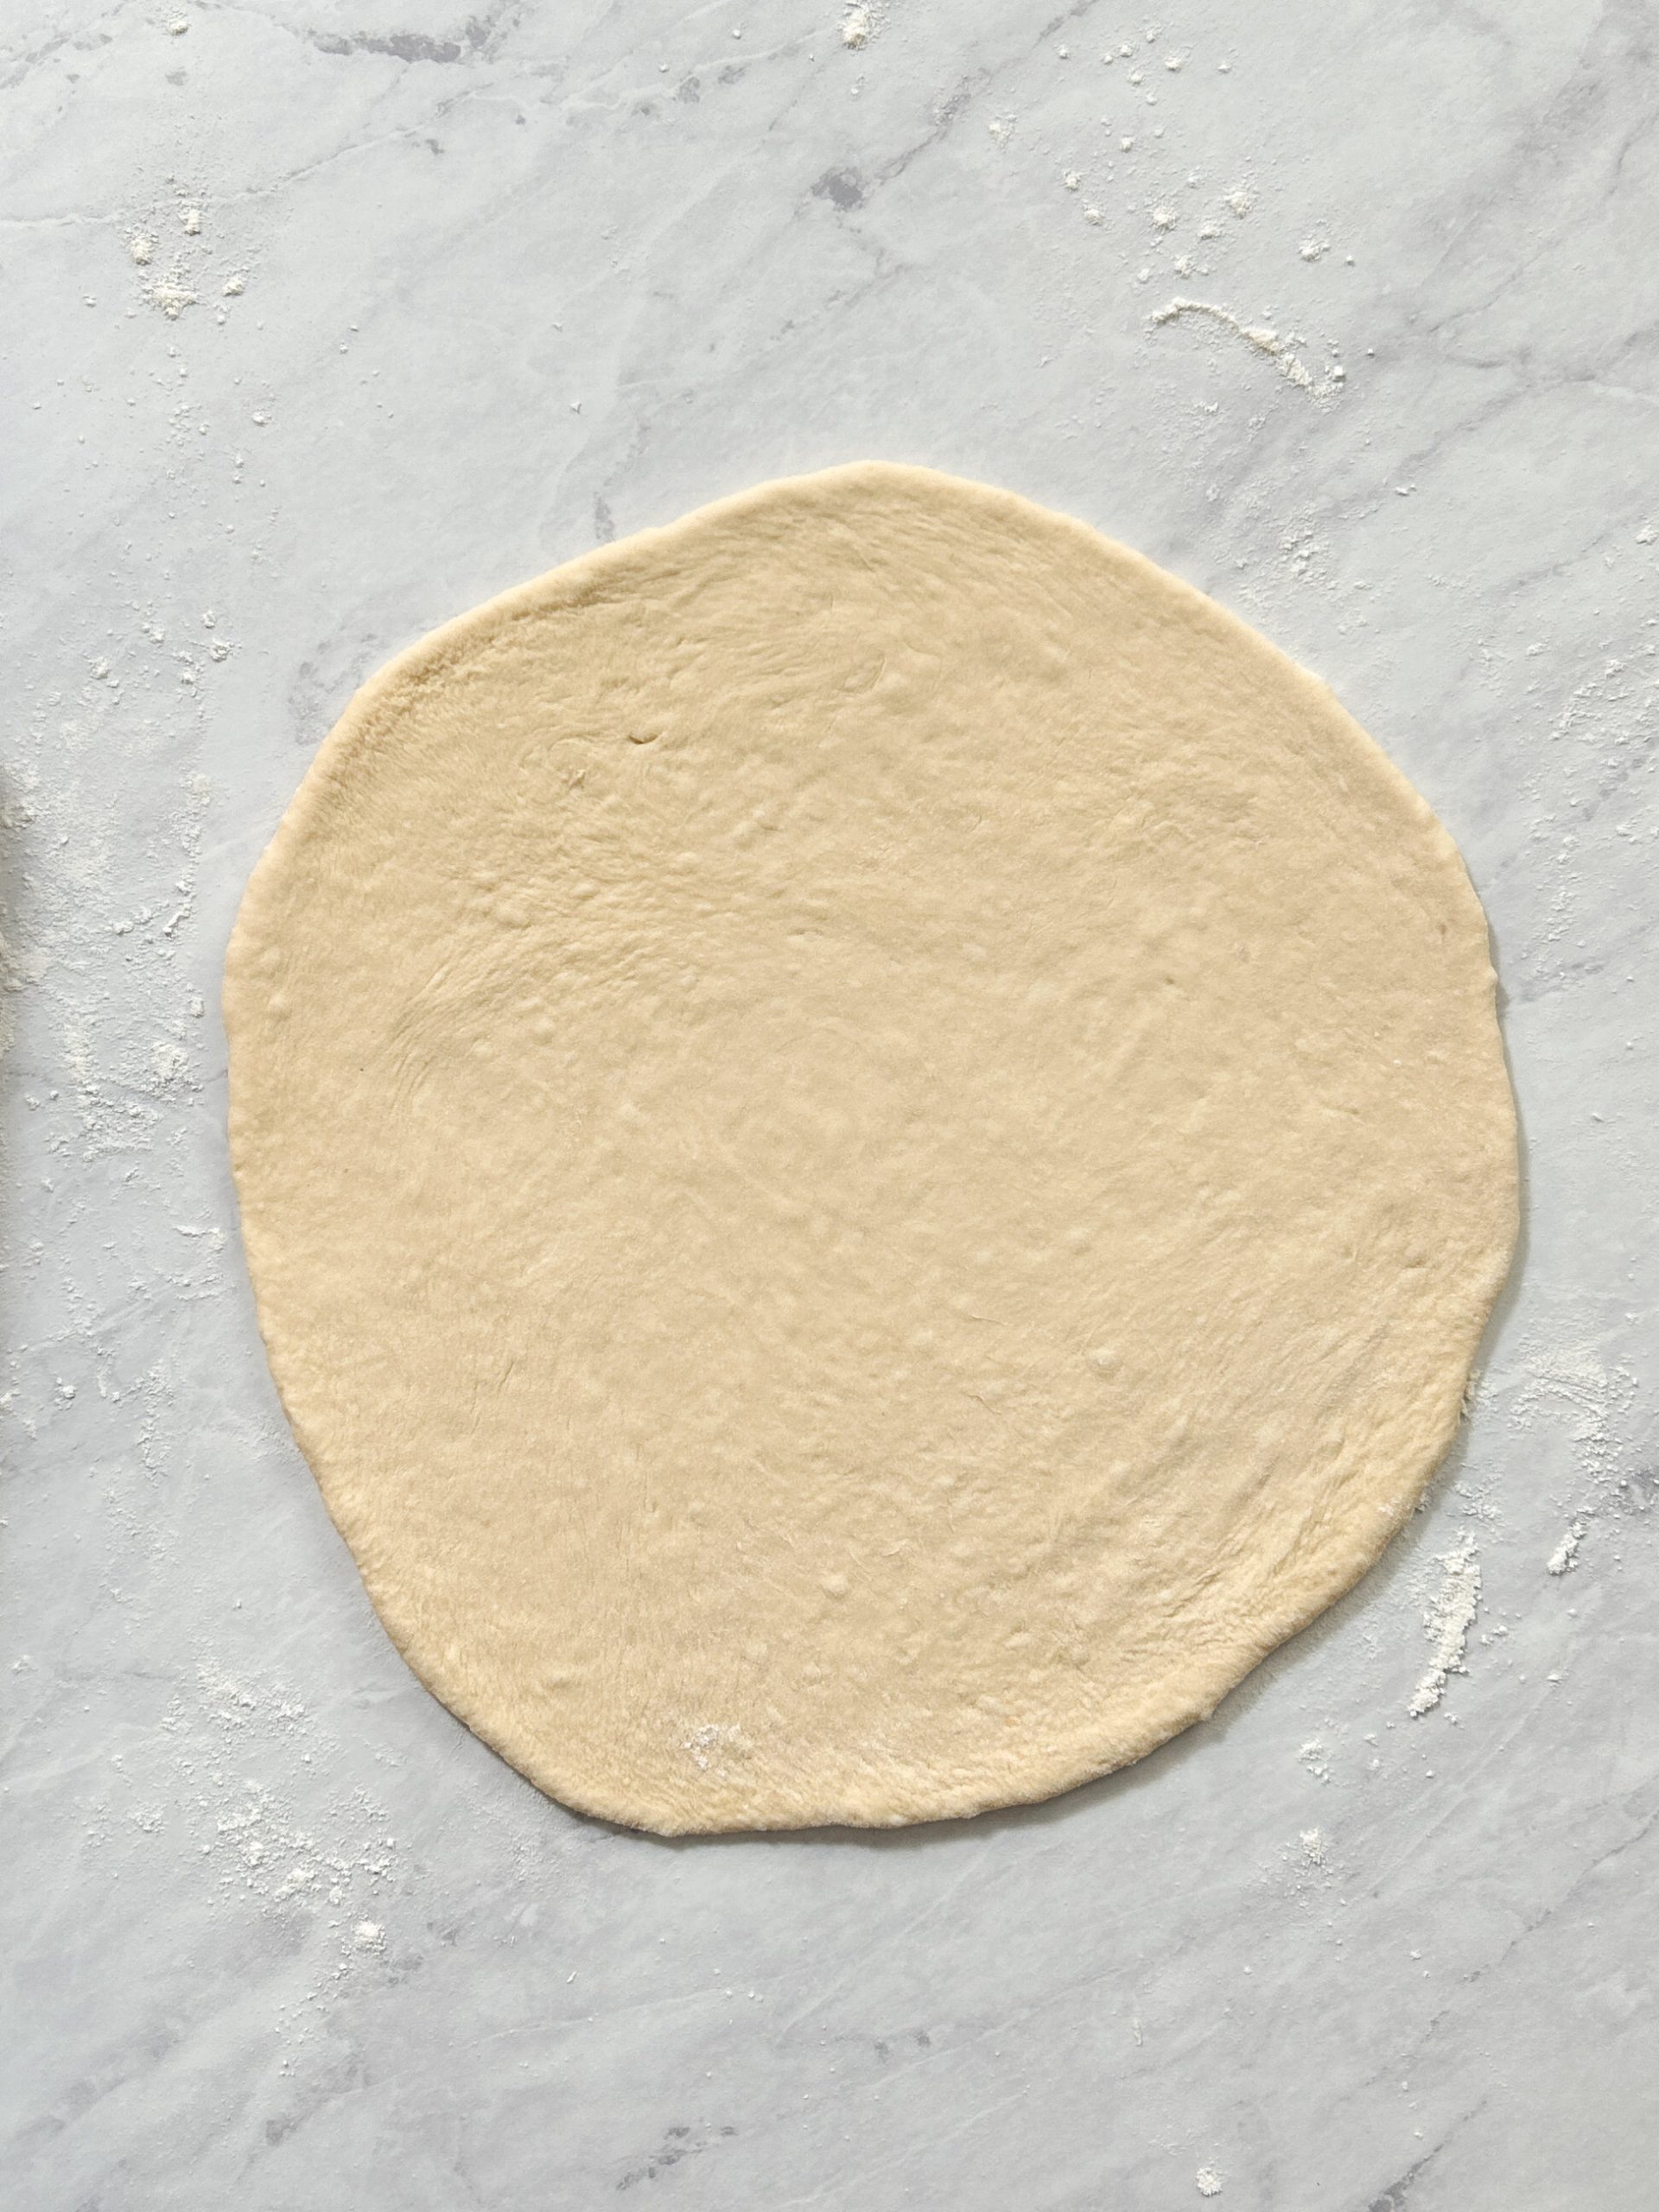 pizza dough rolled into a thin circle shape